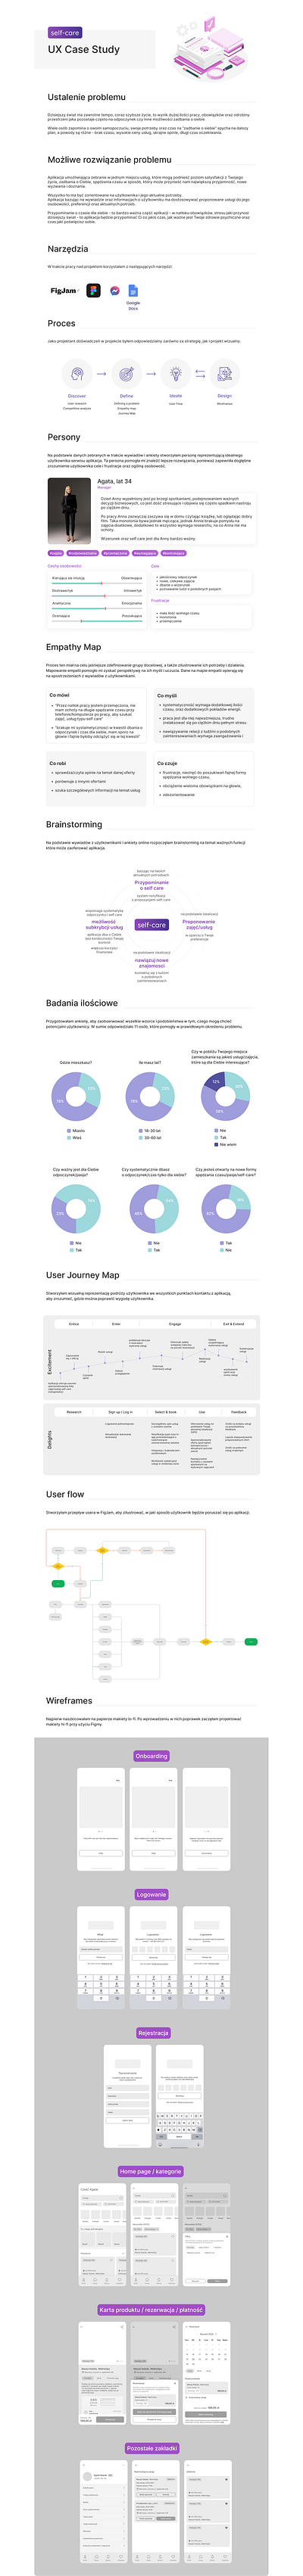 UX Case study aplication app case study user experience user flow user journey ux wireframes wireframing